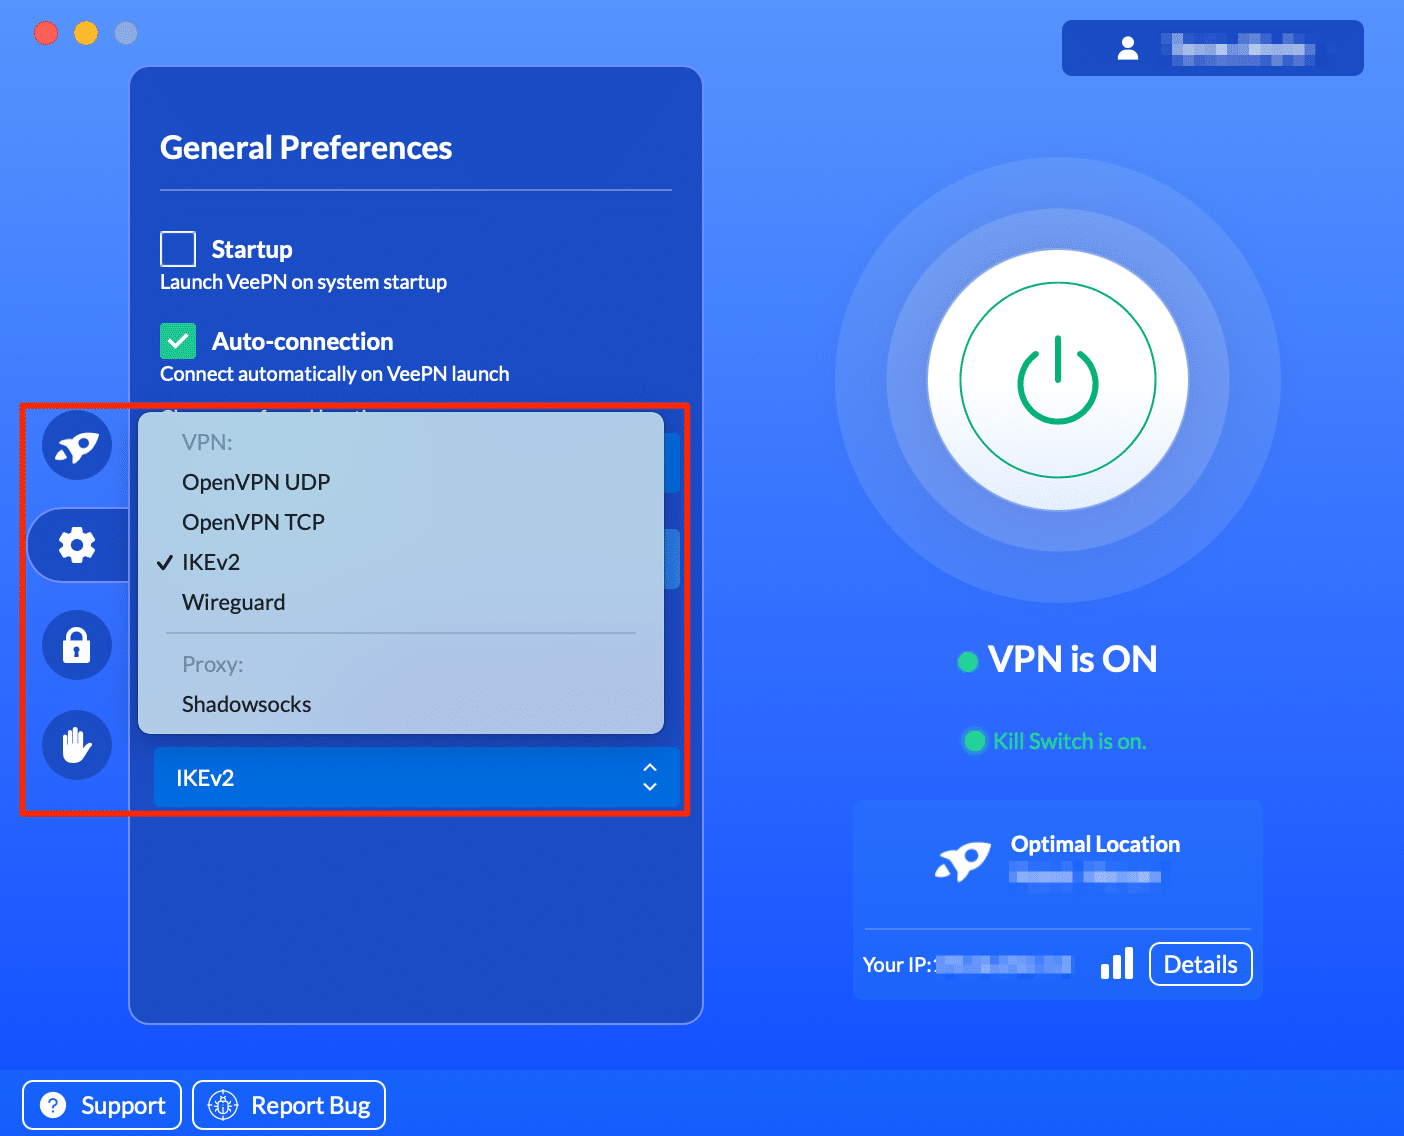 VPN protocols available with the VeePN app